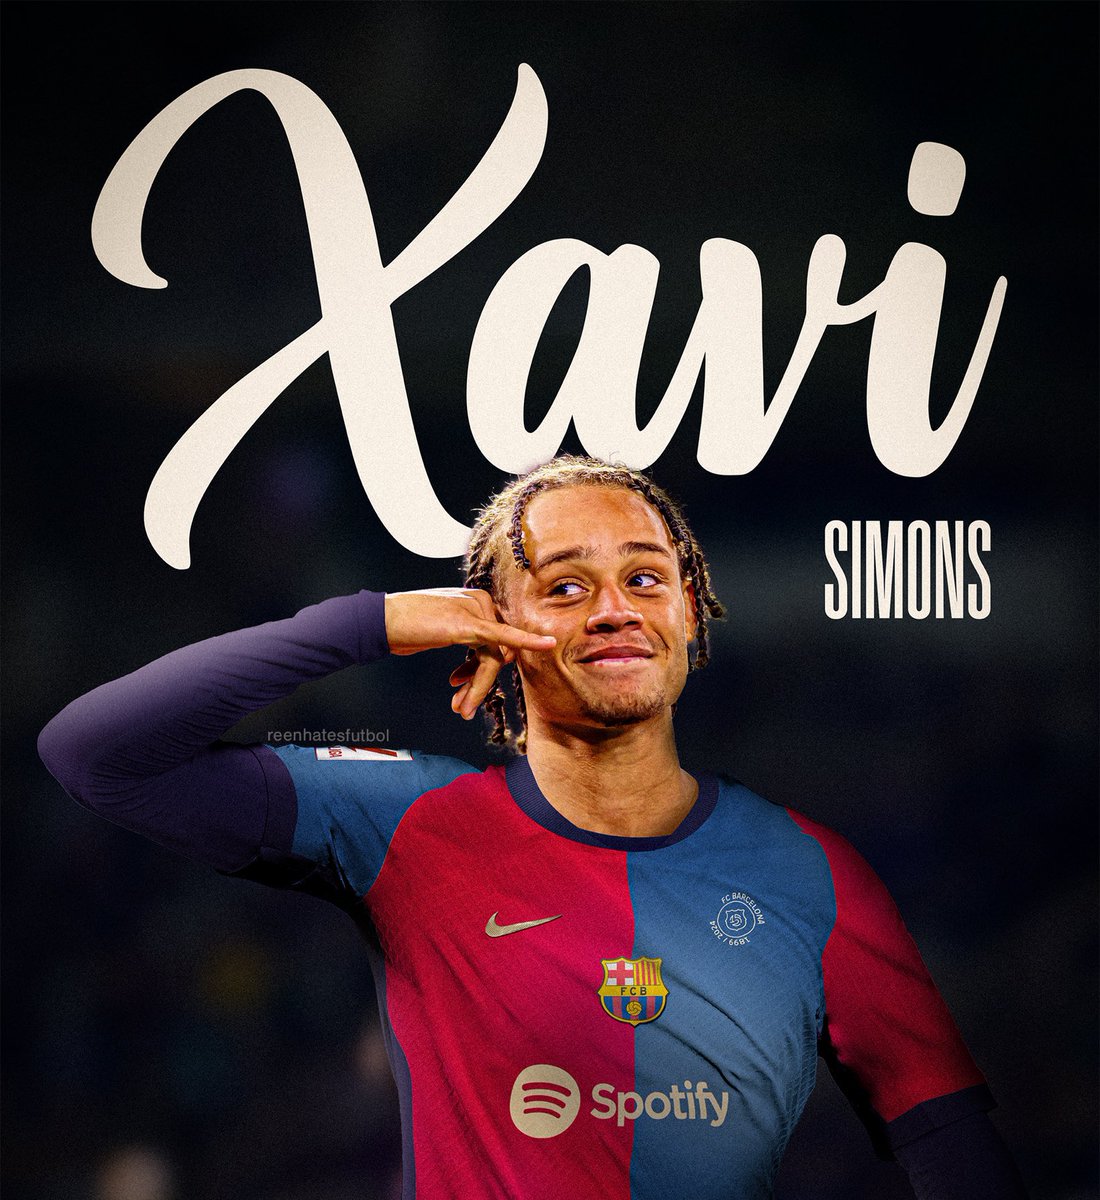 (🌕) BREAKING: Xavi Simons will do everything he can in his power to return back to Barcelona. He plans to inform PSG soon about his desire to leave on loan and head back to Barça. The player is aware about the club’s interest too. @RogerTorello #Transfers 🇳🇱🔵🔴🏡